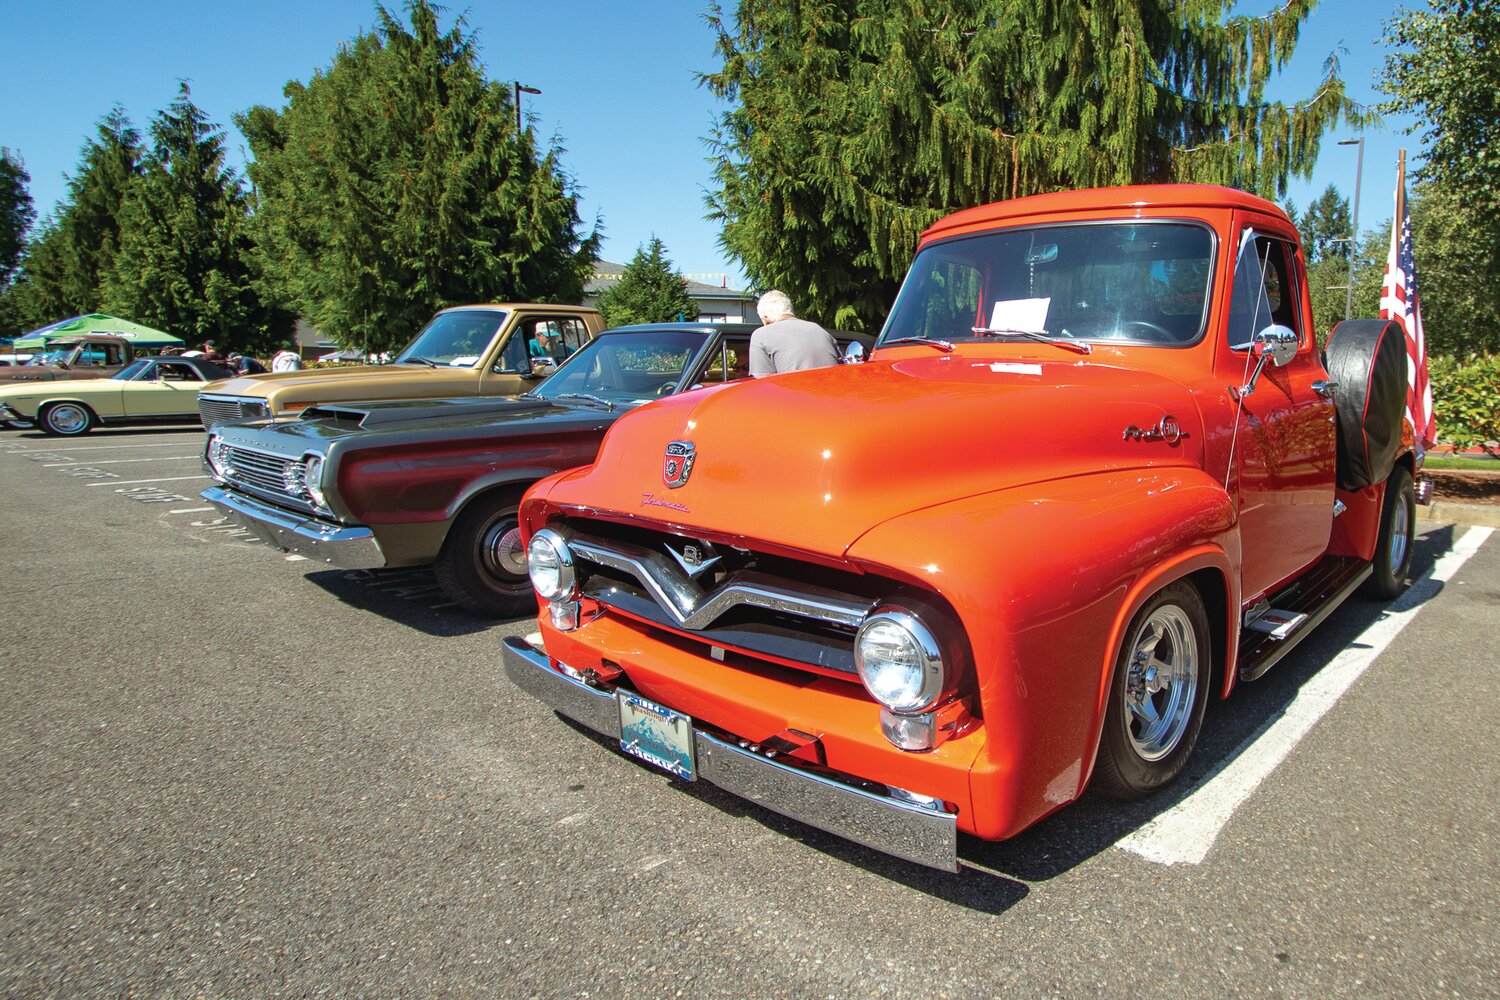 A classic 1954 Ford pickup truck is displayed outside of Yelm High School on Saturday, Sept. 9, for the Yelm FFA Alumni Association car show fundraiser.